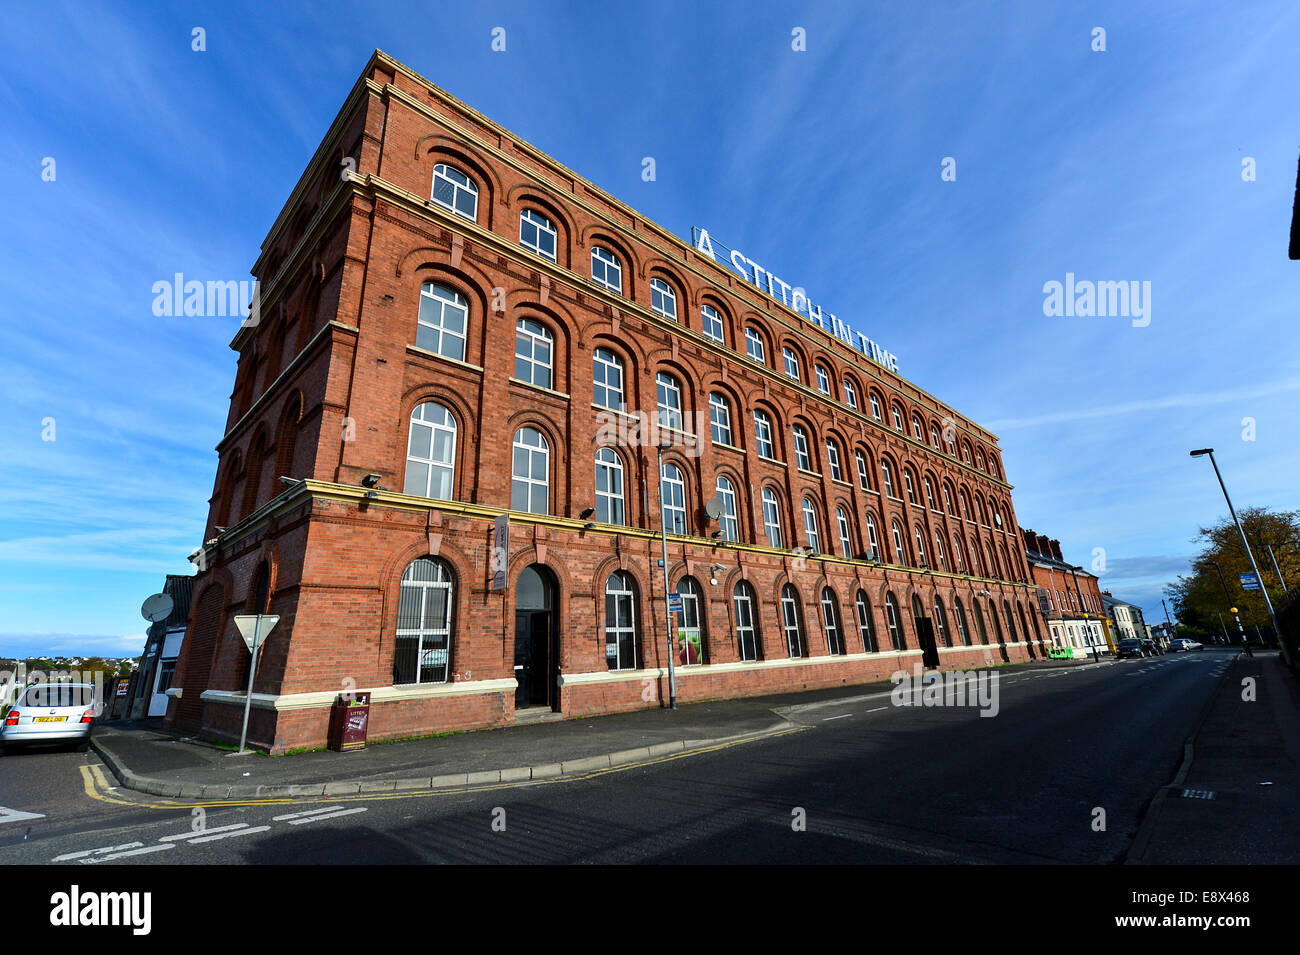 Stock Photo - Former 19th century red brick shirt factory, Derry, Londonderry, Northern Ireland. ©George Sweeney /Alamy Stock Photo